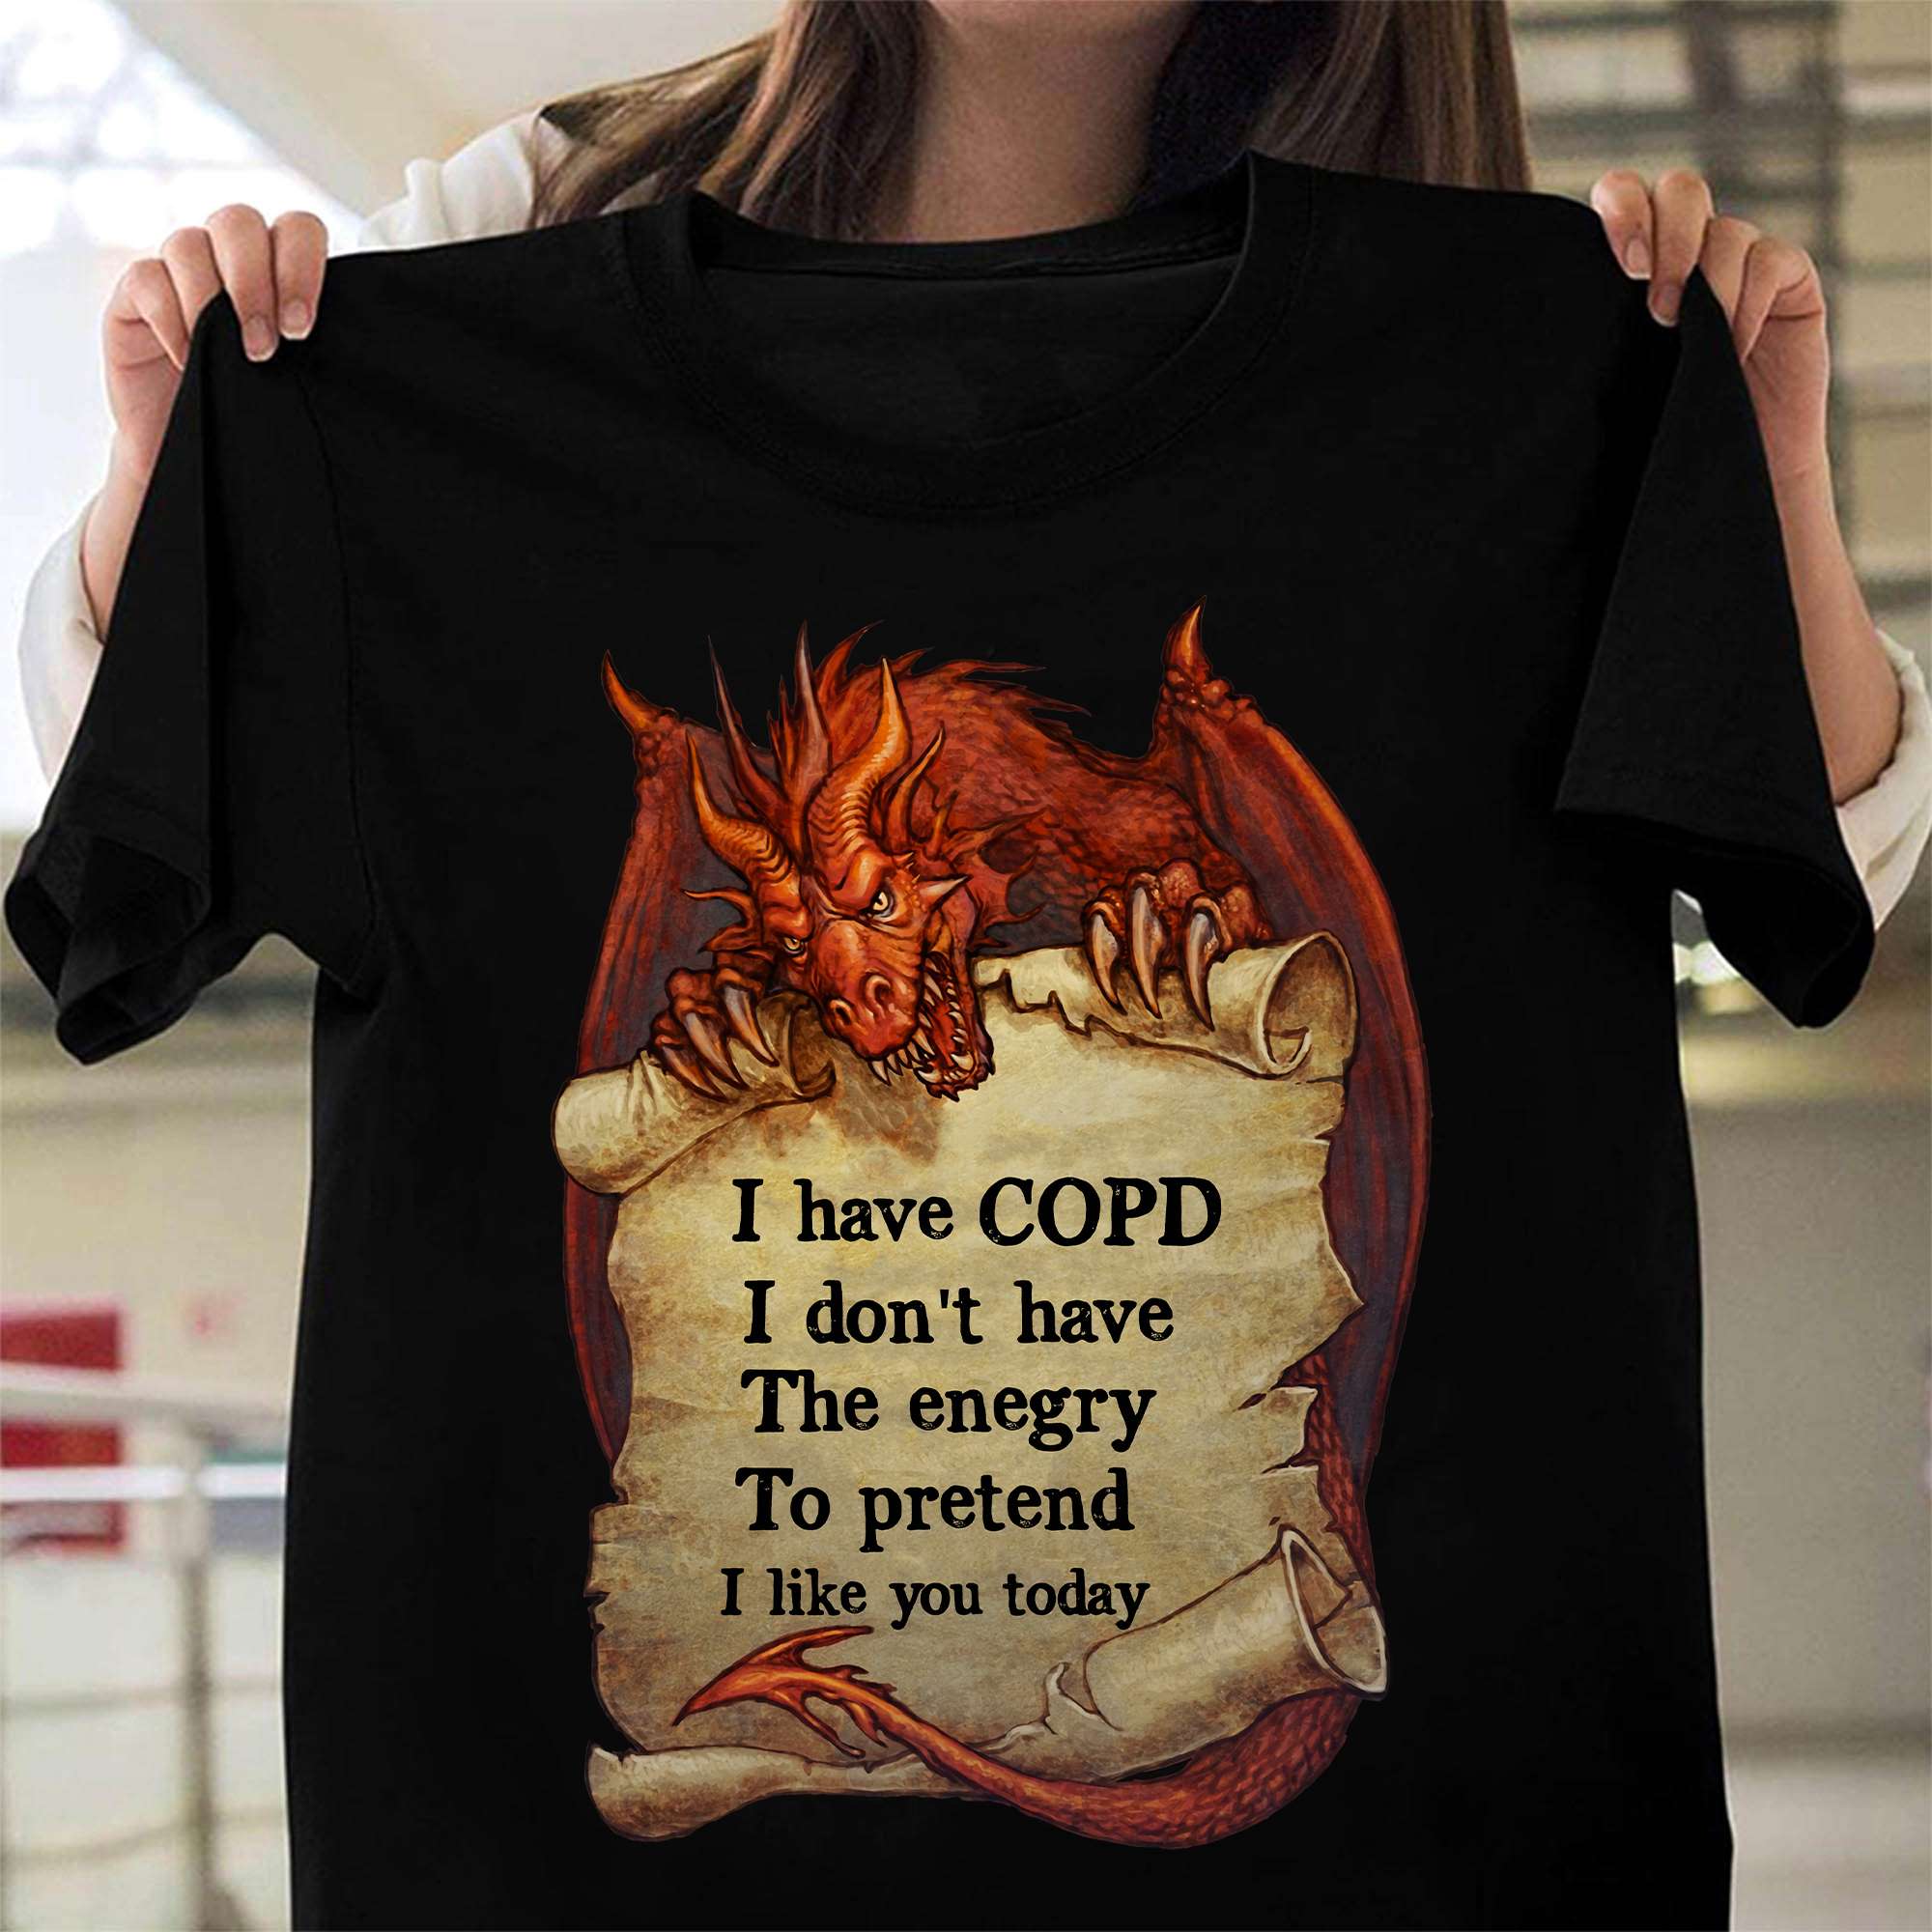 COPD Dragon - I have COPD i don't have the enegry to pretend i like you today